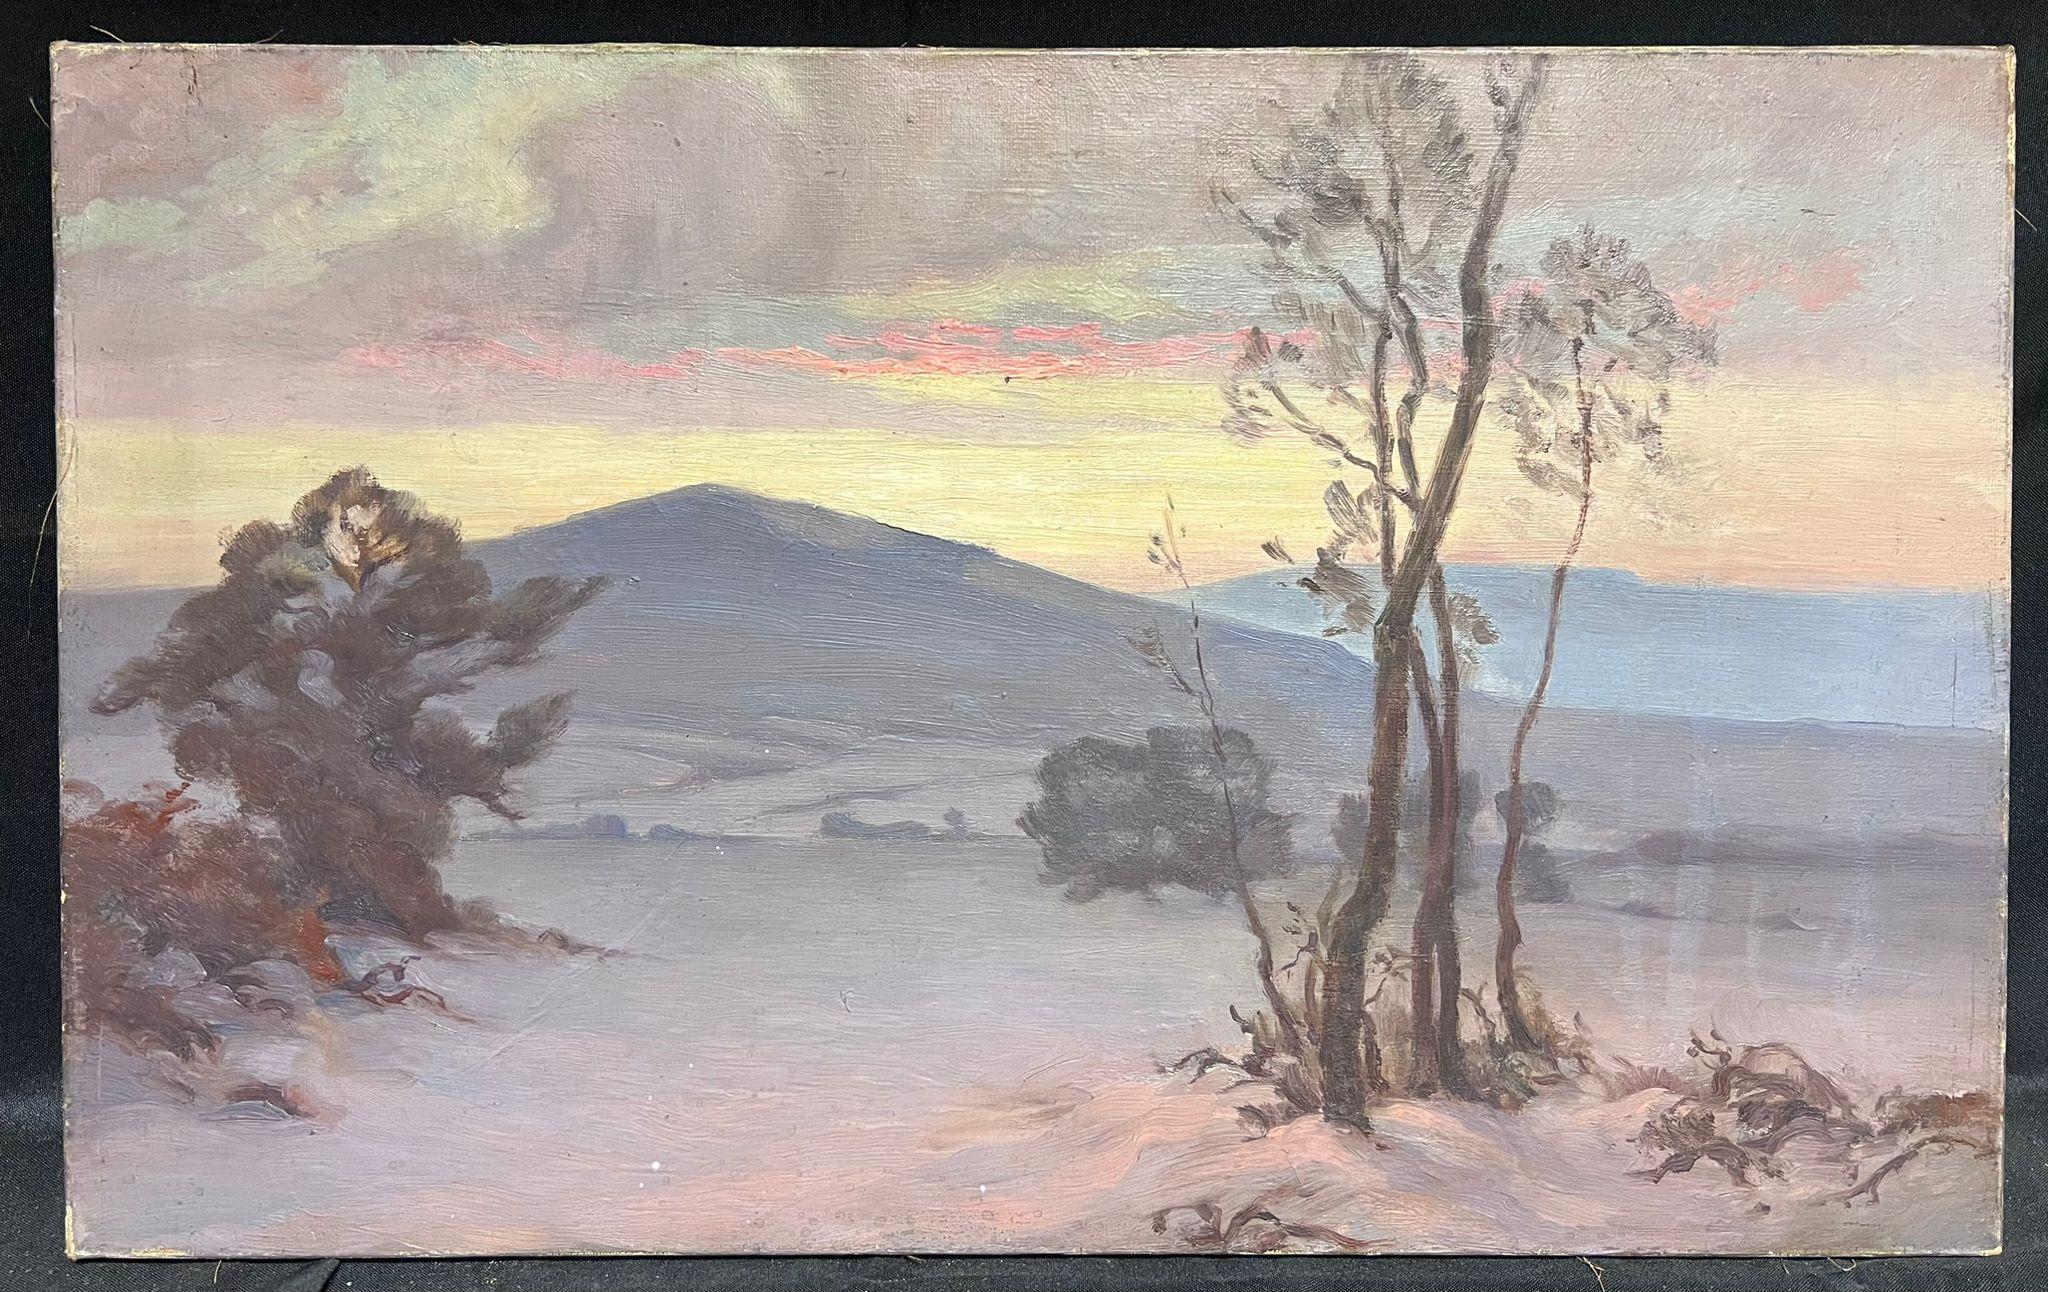 Winter Landscape
French artist, circa 1930's
oil on canvas, unframed
canvas: 15 x 24 inches
provenance: private collection, France
condition: good and sound condition though with a few streaky marks to the surface. 